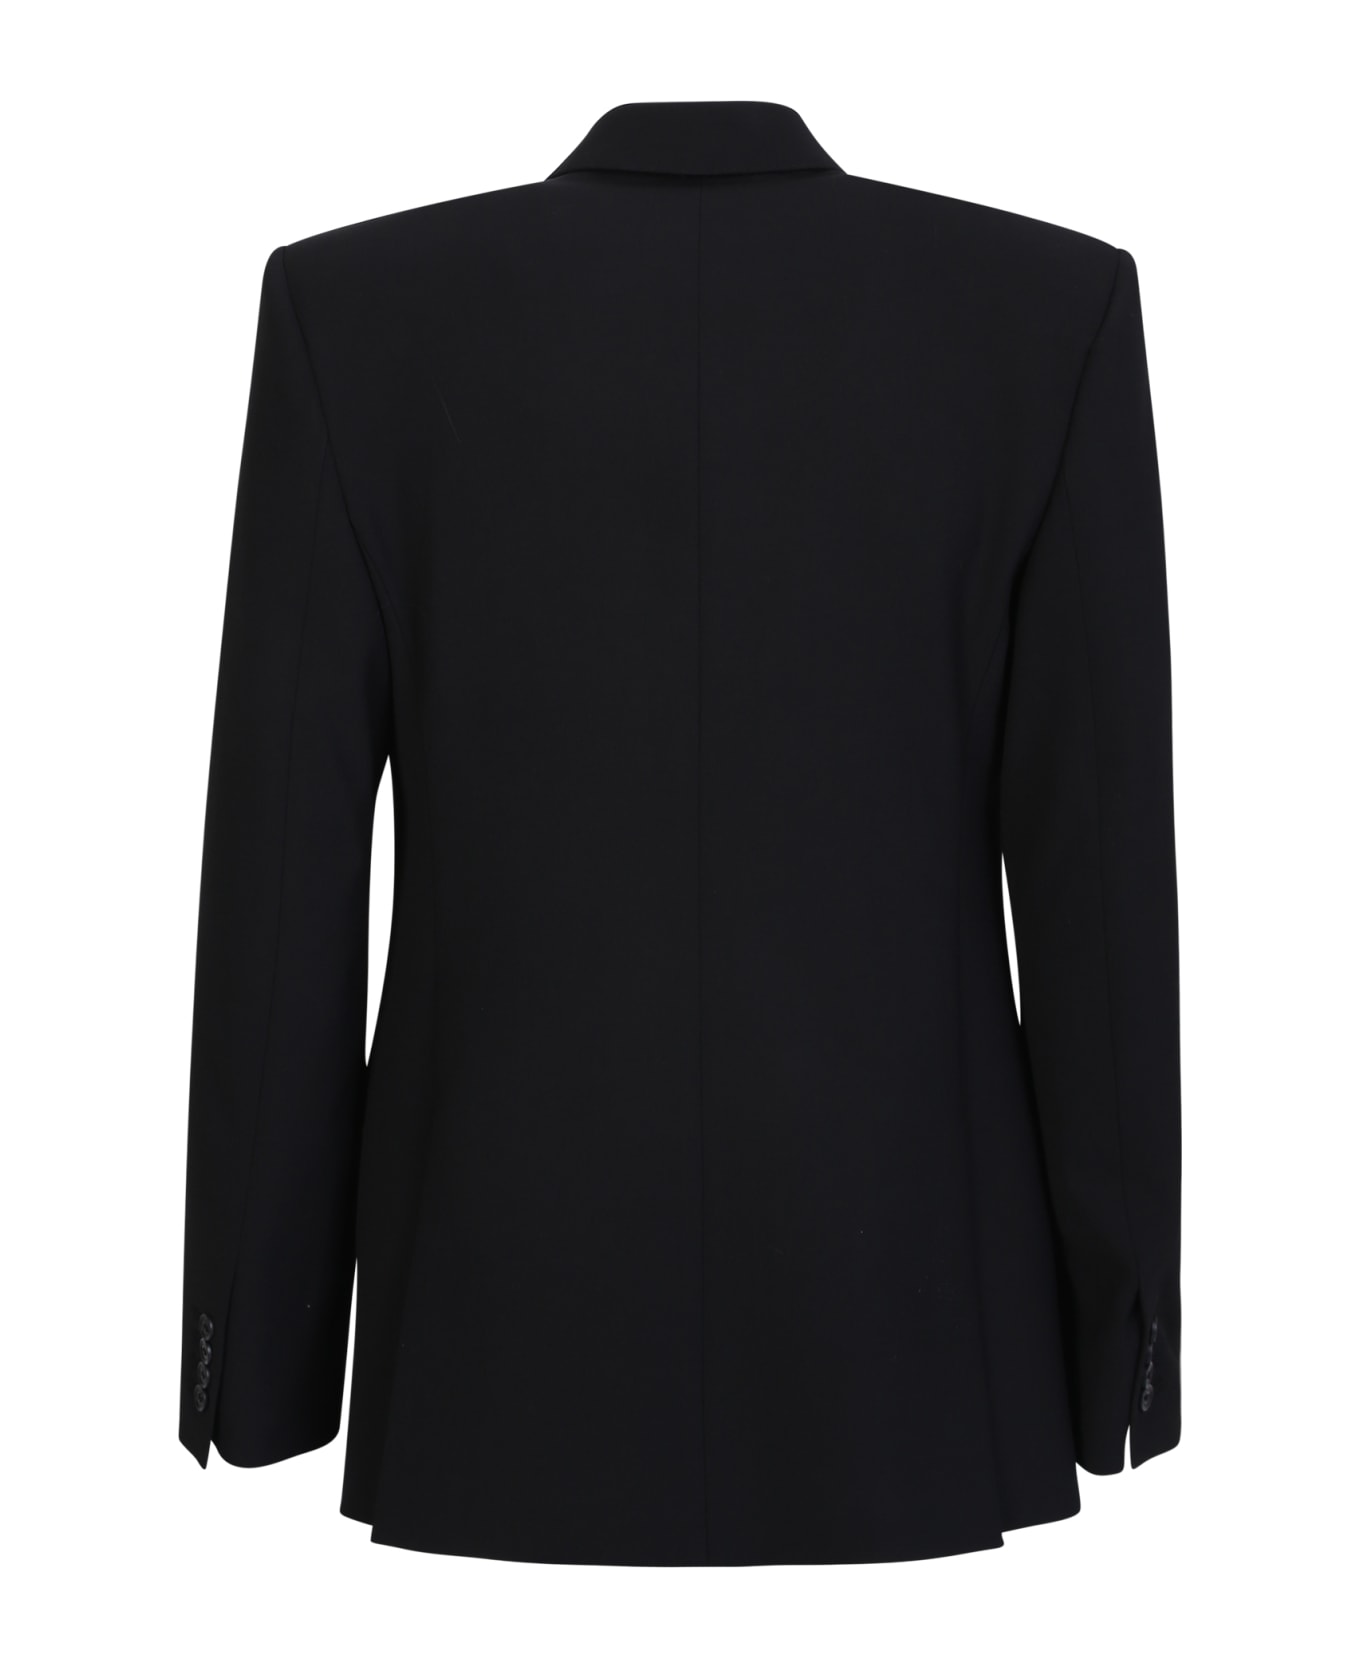 Balenciaga Double-breasted Blazer With Peaked Revers - Black ブレザー